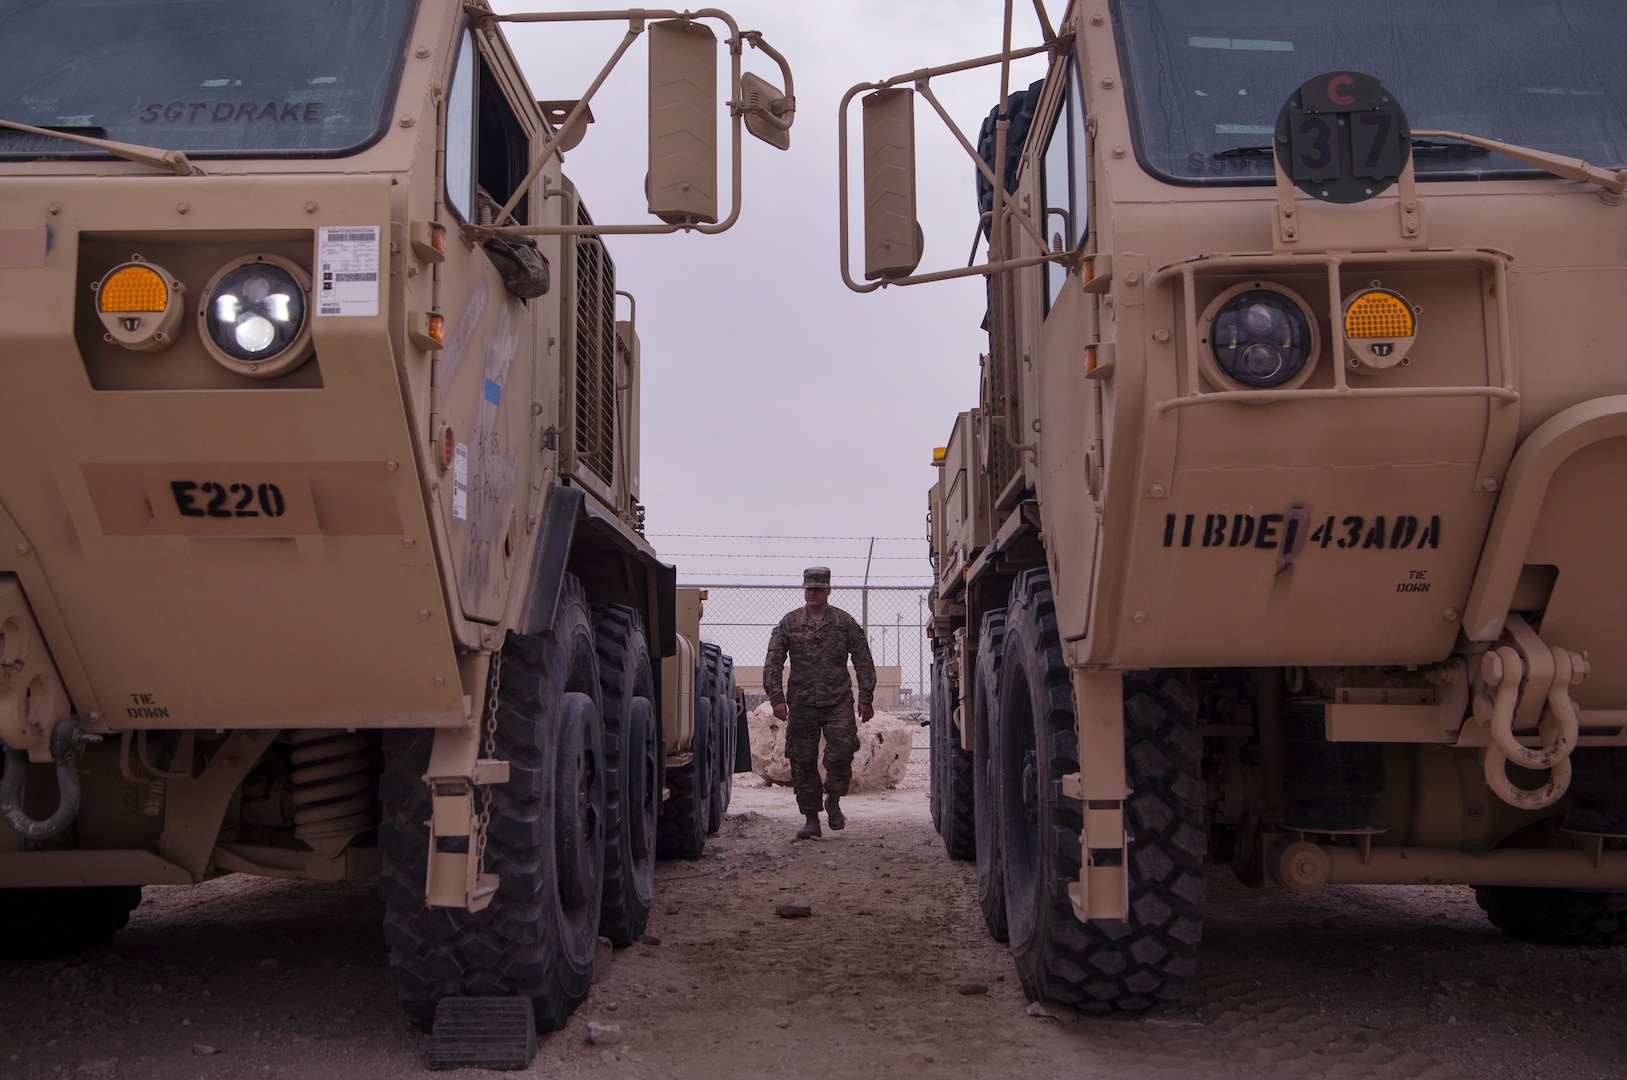 U.S. Army Spc. Brent Fleming, Echo Company, 1st Battalion, 43rd Air Defense Artillery (ADA) Battalion, 11th ADA Brigade allied trade specialist, assists in conducting operations checks on military vehicles Jan. 29, 2019, at Al Udeid Air Base, Qatar. Soldiers of Echo Company perform mechanical work and repairs for various equipment and assets that support Al Udeid’s air defense capabilities, including surface-to-air missile systems. (U.S. Air Force photo by Tech. Sgt. Christopher Hubenthal)